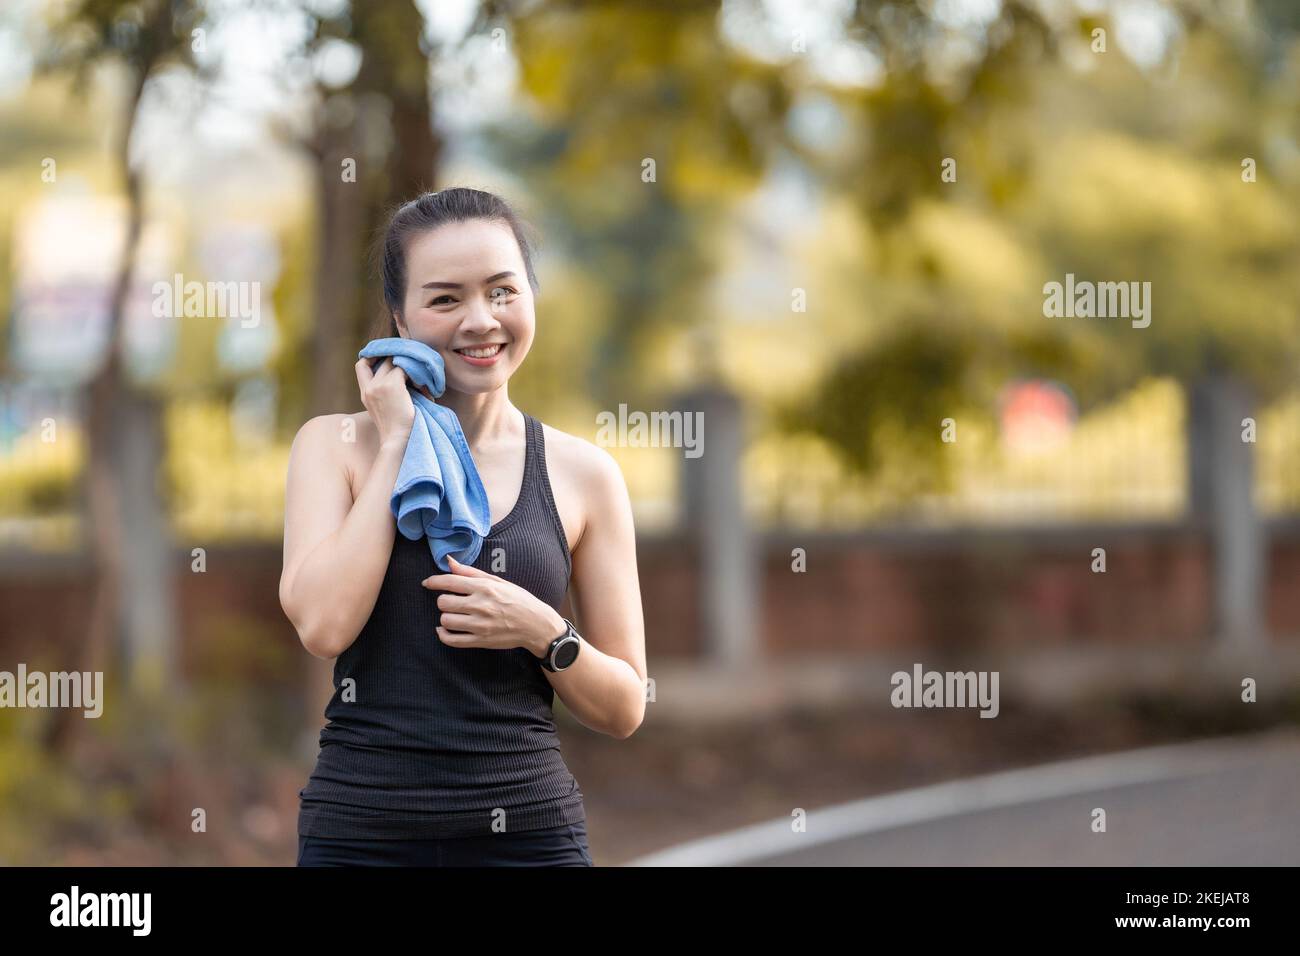 An Asian female in a sports suit on the street, wiping her face with a towel an smiling Stock Photo